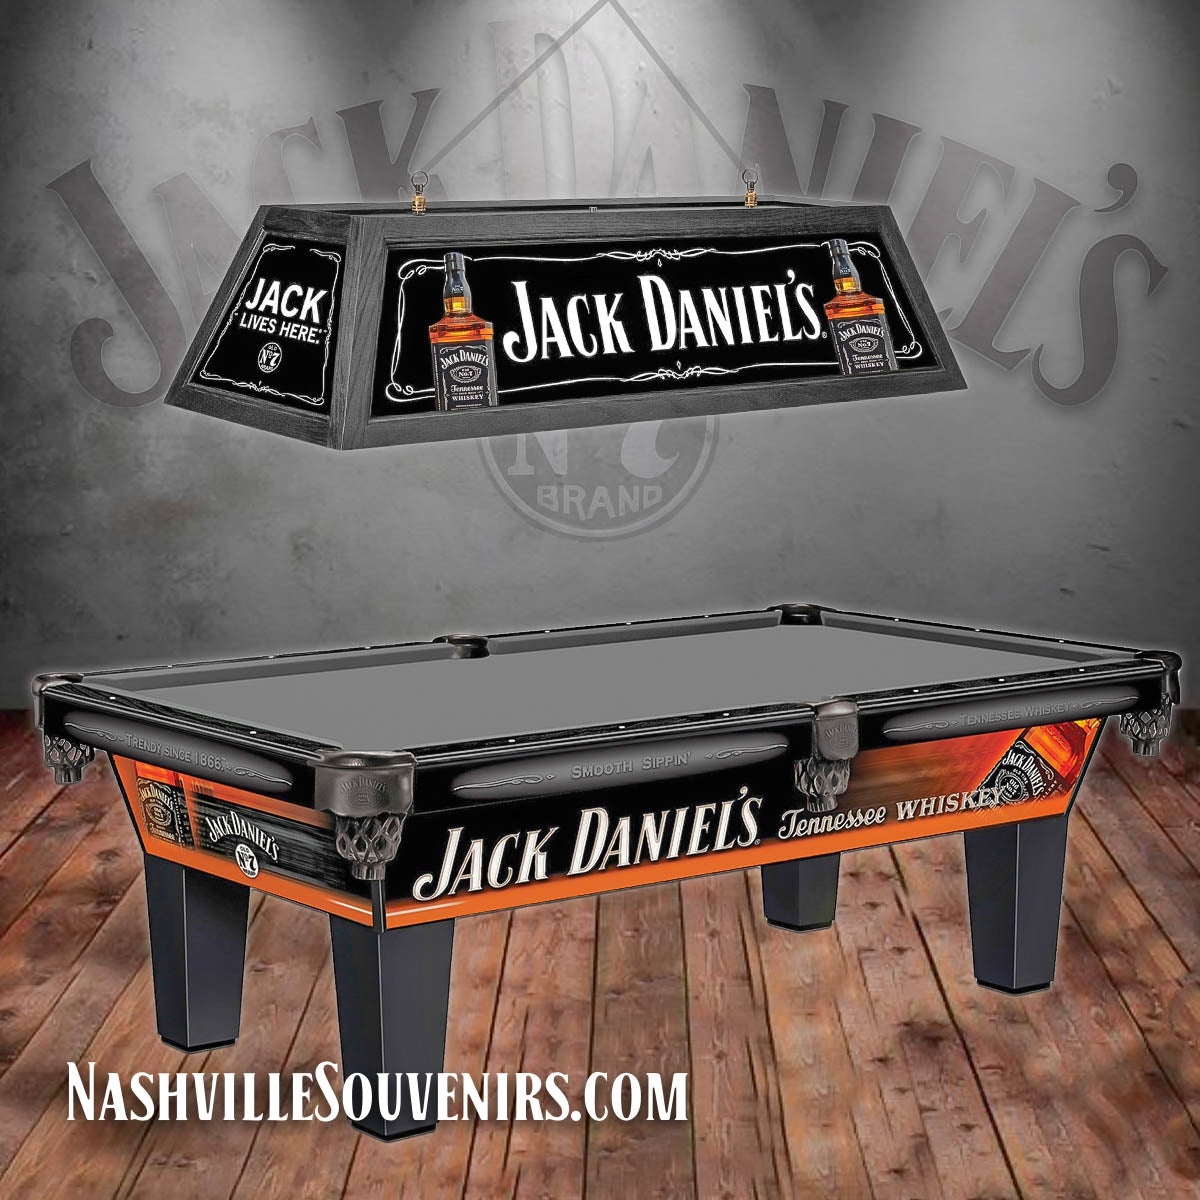 Here's the perfect way to brighten up the man cave. This beautiful Jack Daniel's billiard light goes well with any pool table or home bar decor -- especially our optional Jack Daniel's billiard table pictured.